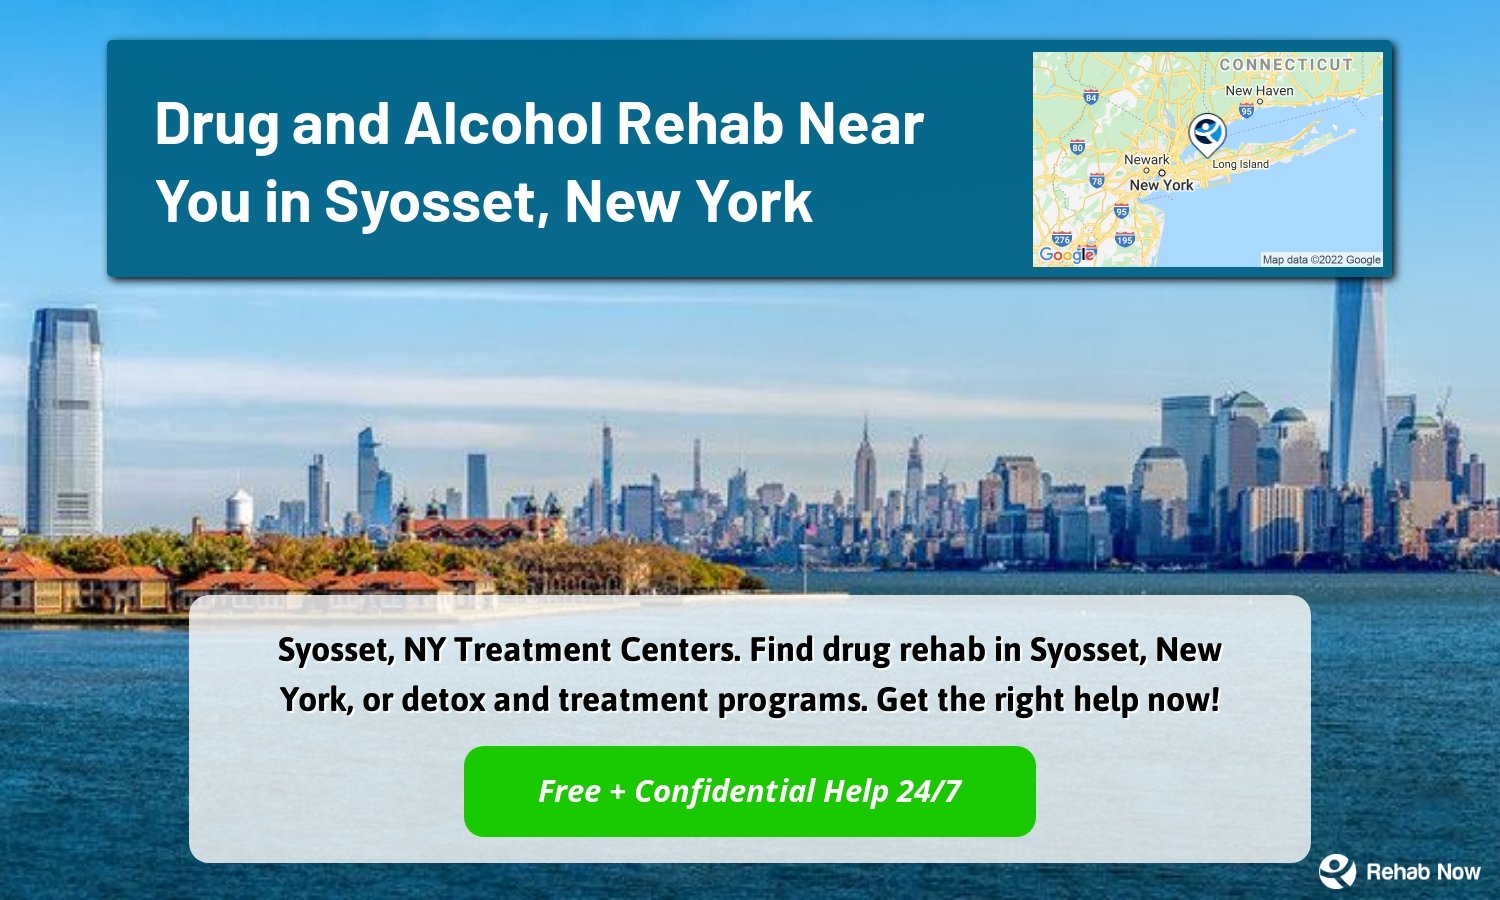 Syosset, NY Treatment Centers. Find drug rehab in Syosset, New York, or detox and treatment programs. Get the right help now!